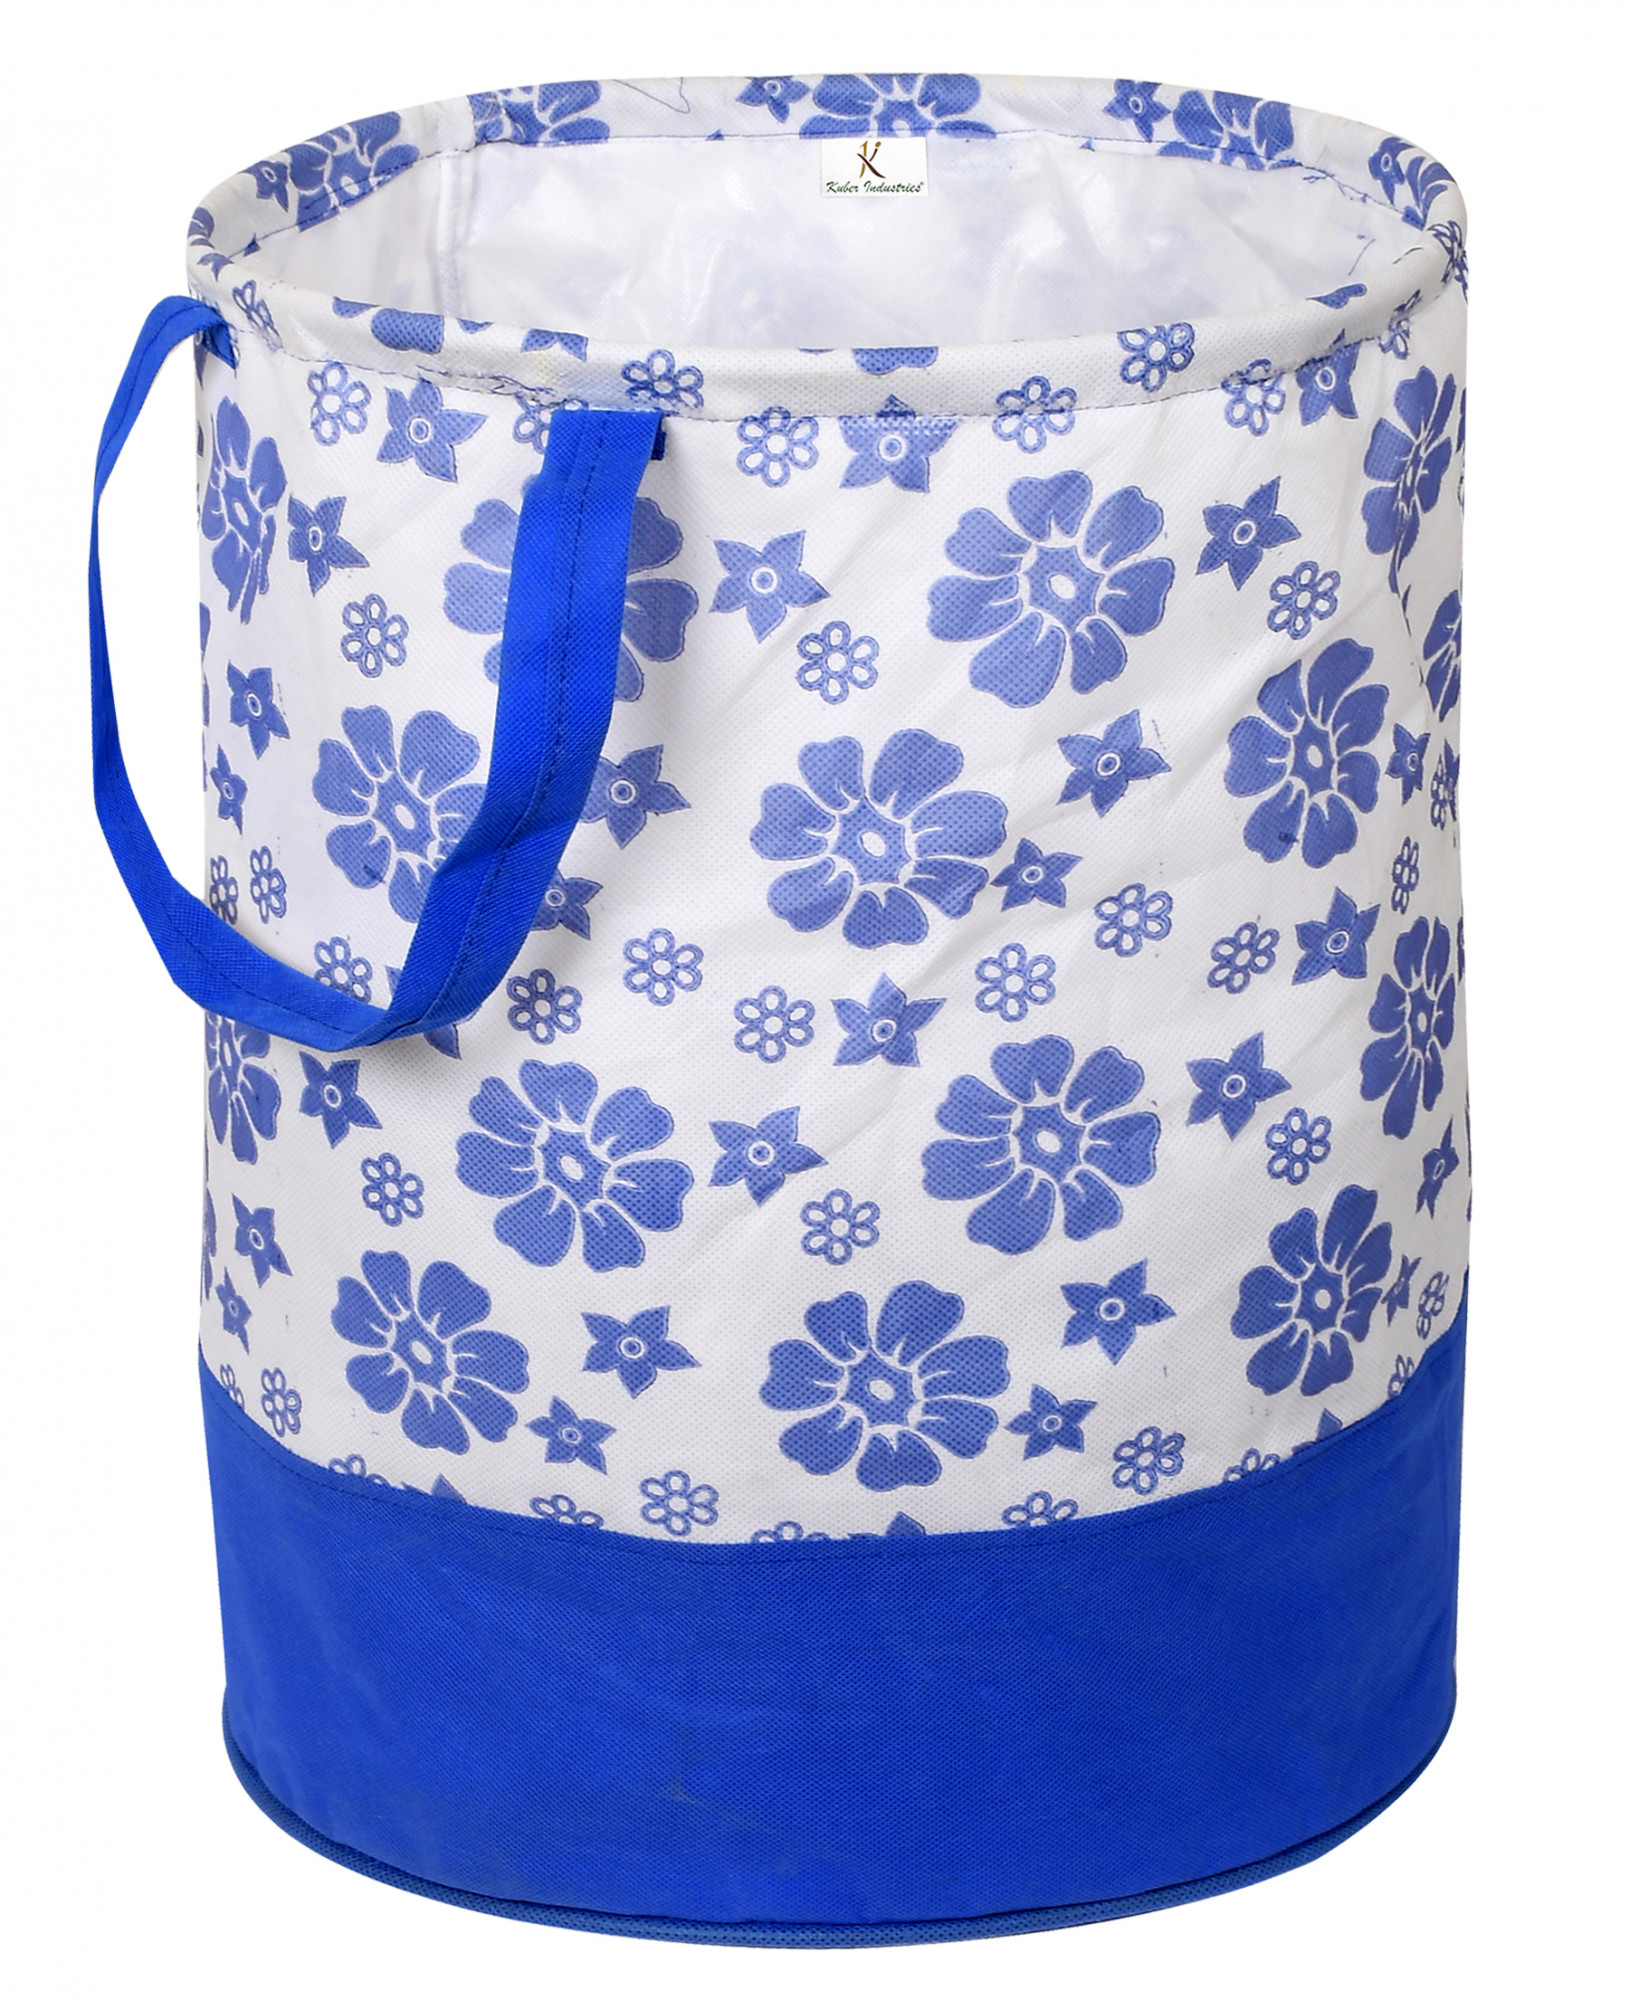 Kuber Industries Flower Print Round Non Woven Fabric Foldable Laundry Basket , Toy Storage Basket, Cloth Storage Basket With Handles,45 Ltr (Blue)-33_S_KUBQMART11608